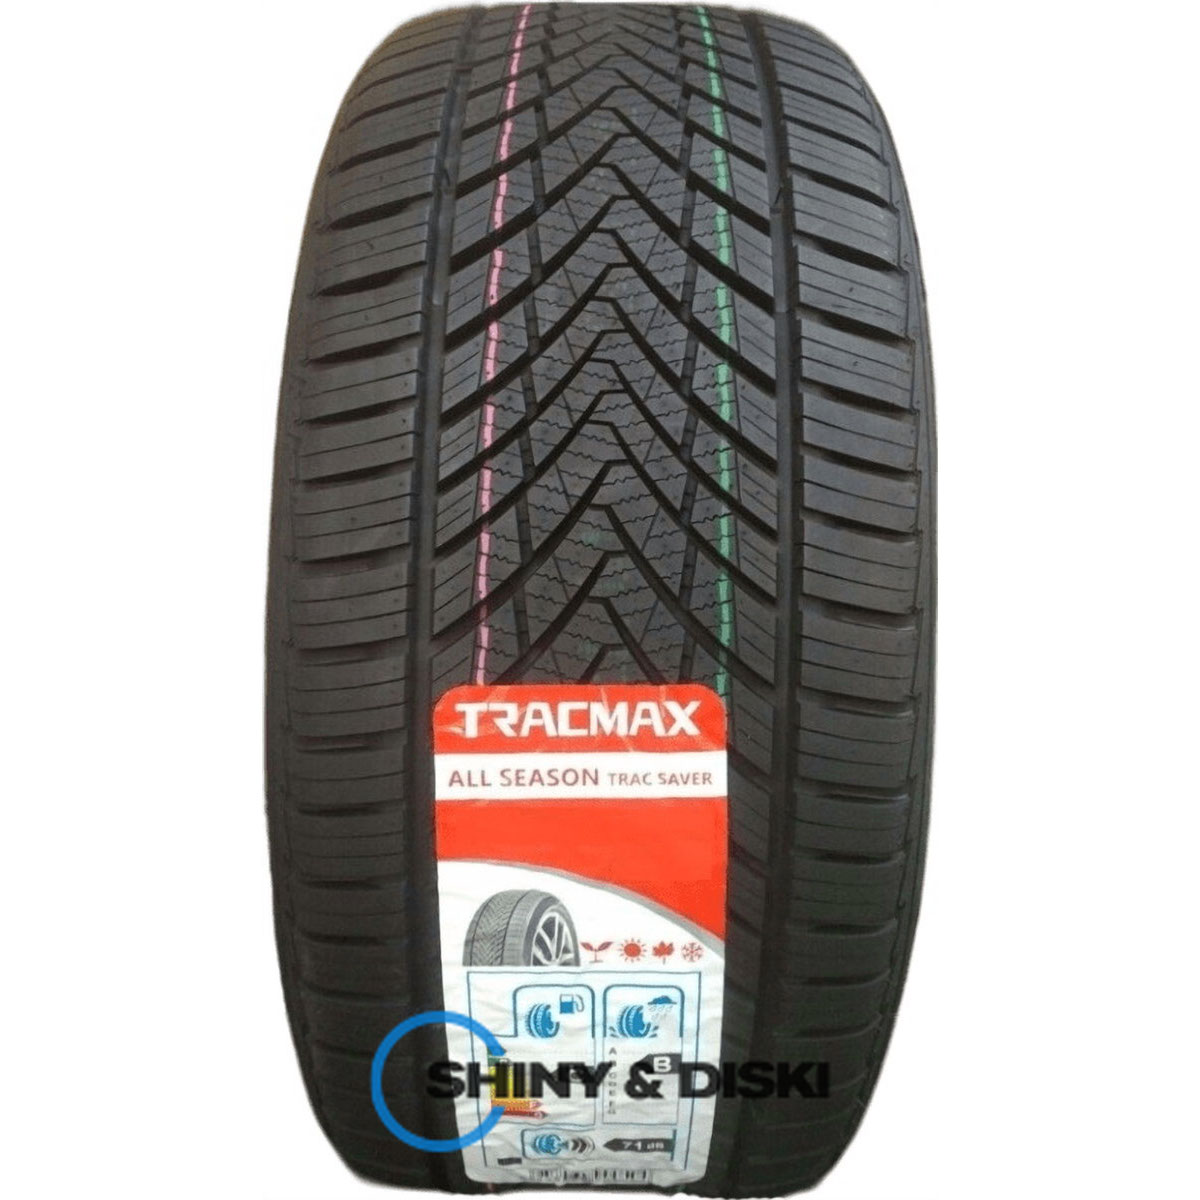 покрышки tracmax a/s trac saver 185/55 r14 80h